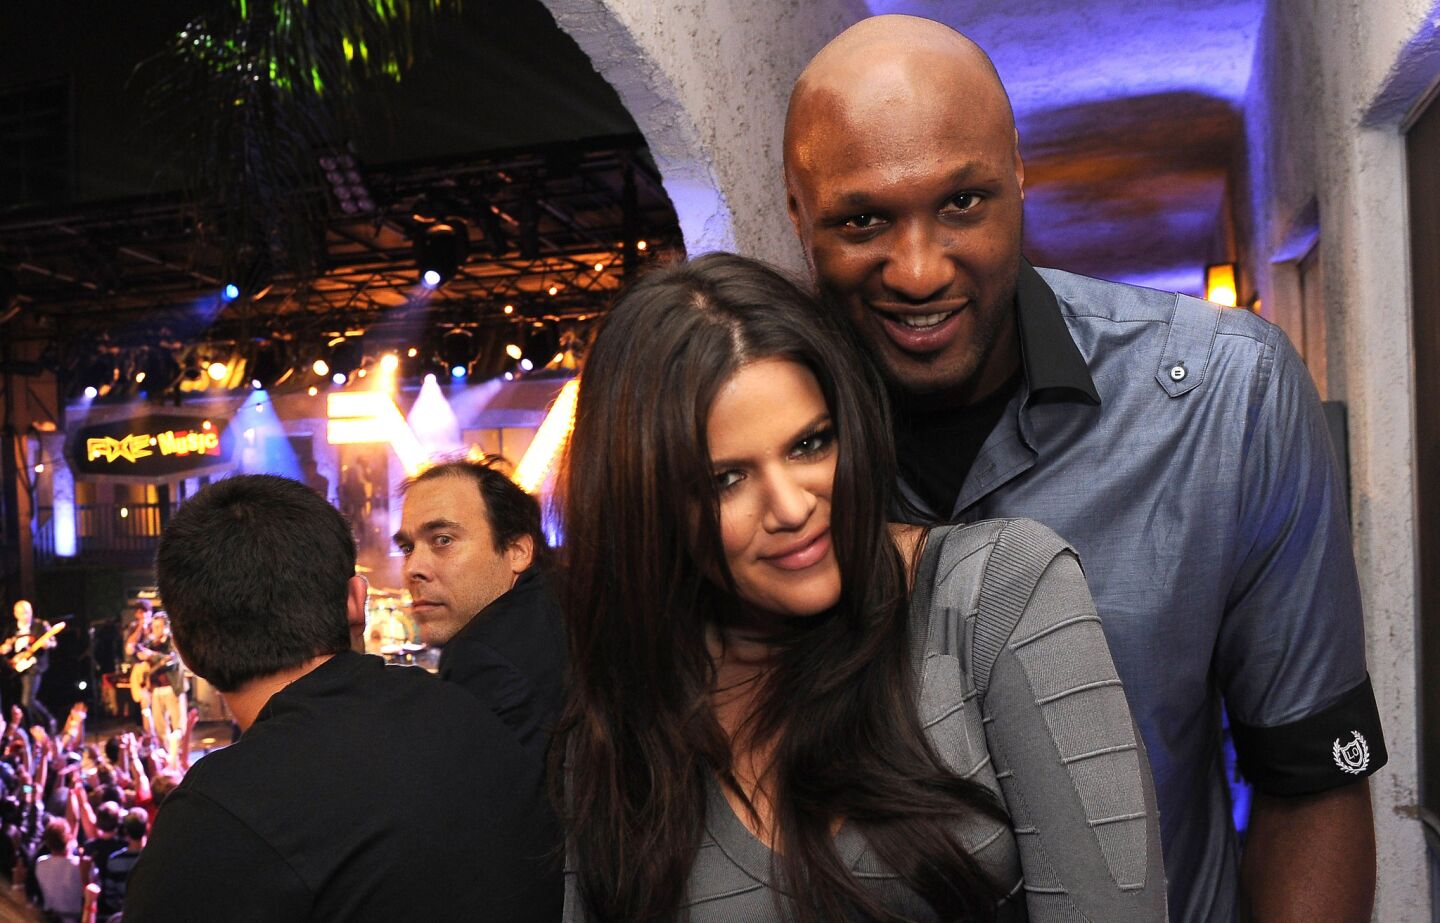 Television personality Khloe Kardashian and Los Angeles Laker Lamar Odom attend the "AXE Music One Night Only" concert series featuring Weezer at Dunes Inn Motel - Sunset on September 21, 2010 in Hollywood.